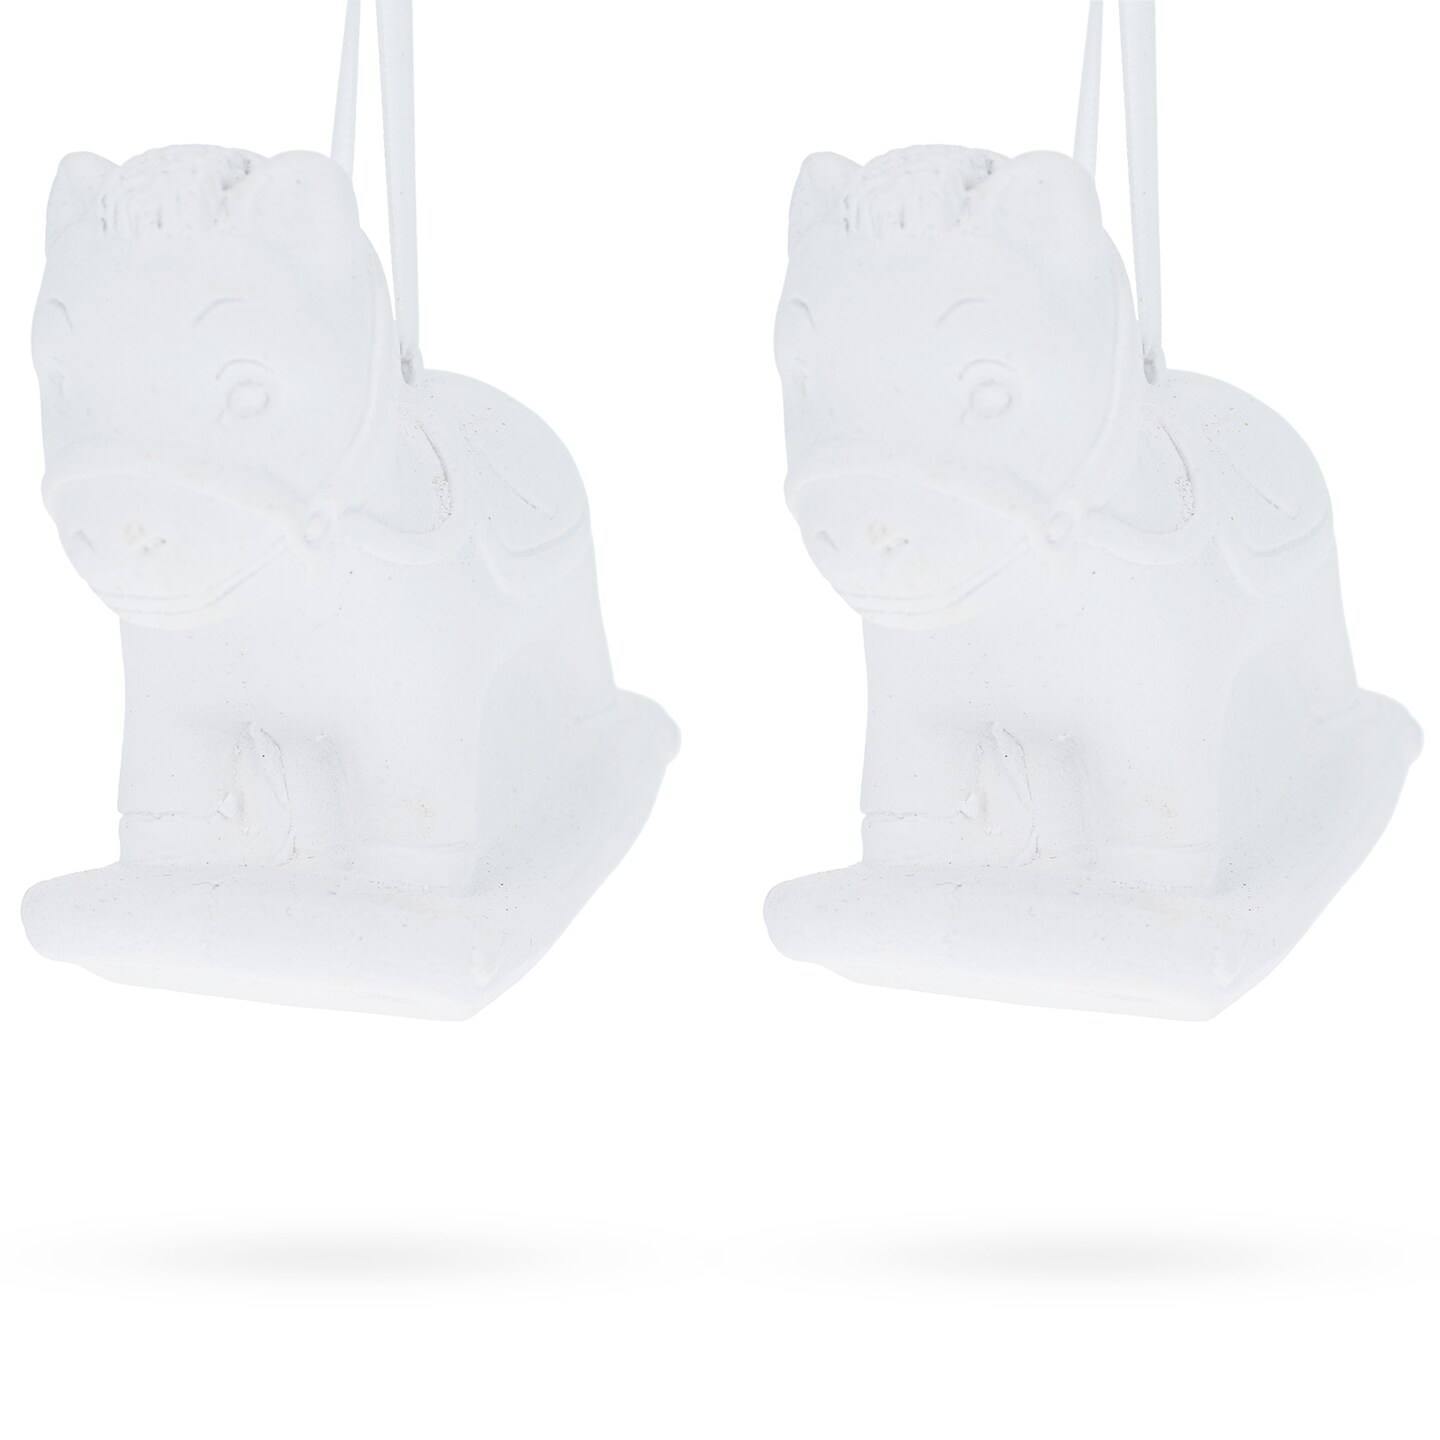 Set of 2 Unfinished Unpainted Blank White Plaster Rocking Horse Ornaments 3.5 Inches